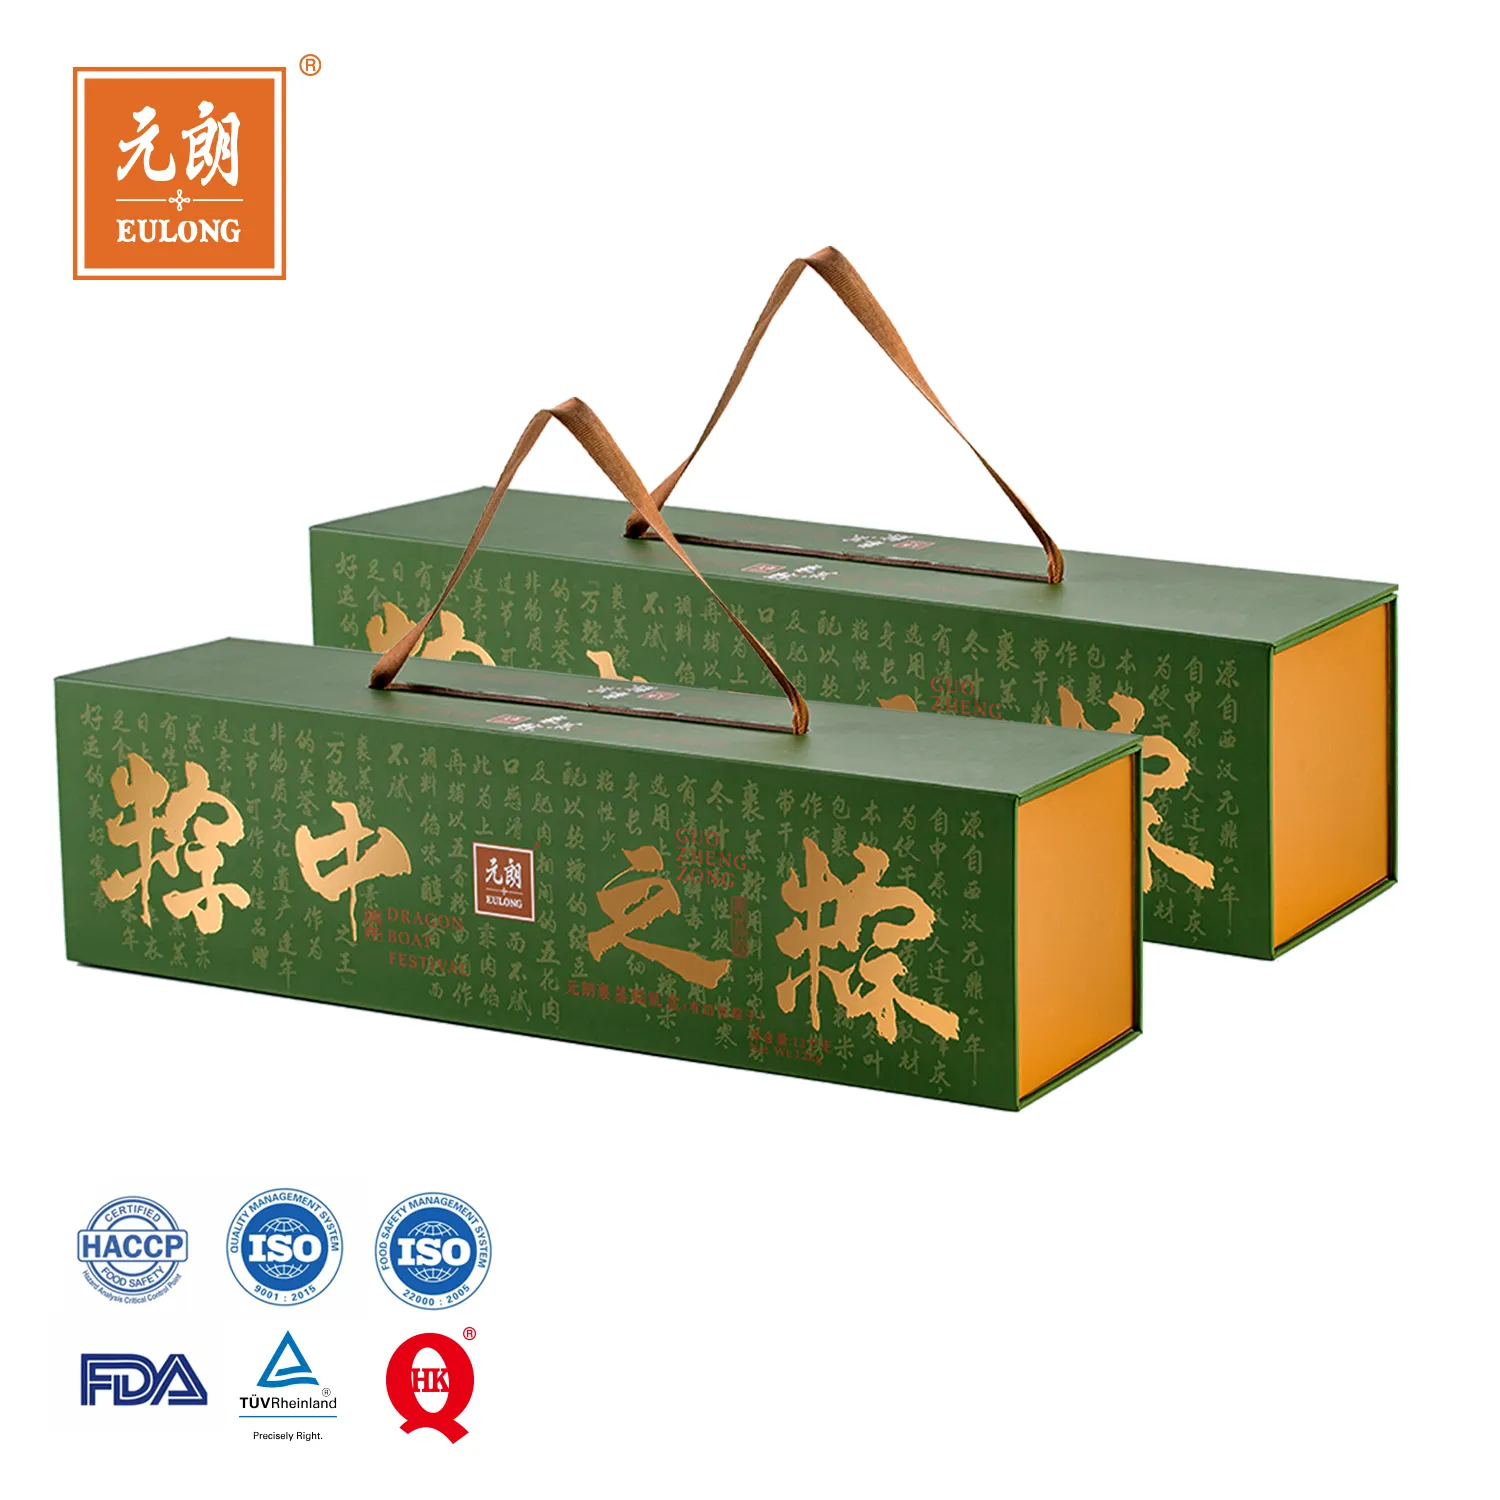 Chinese Manufacture Pandan Zongzi Delicious Rice Paper Roll Dumplings Snack Gift Boxes For Employees and Snack Food